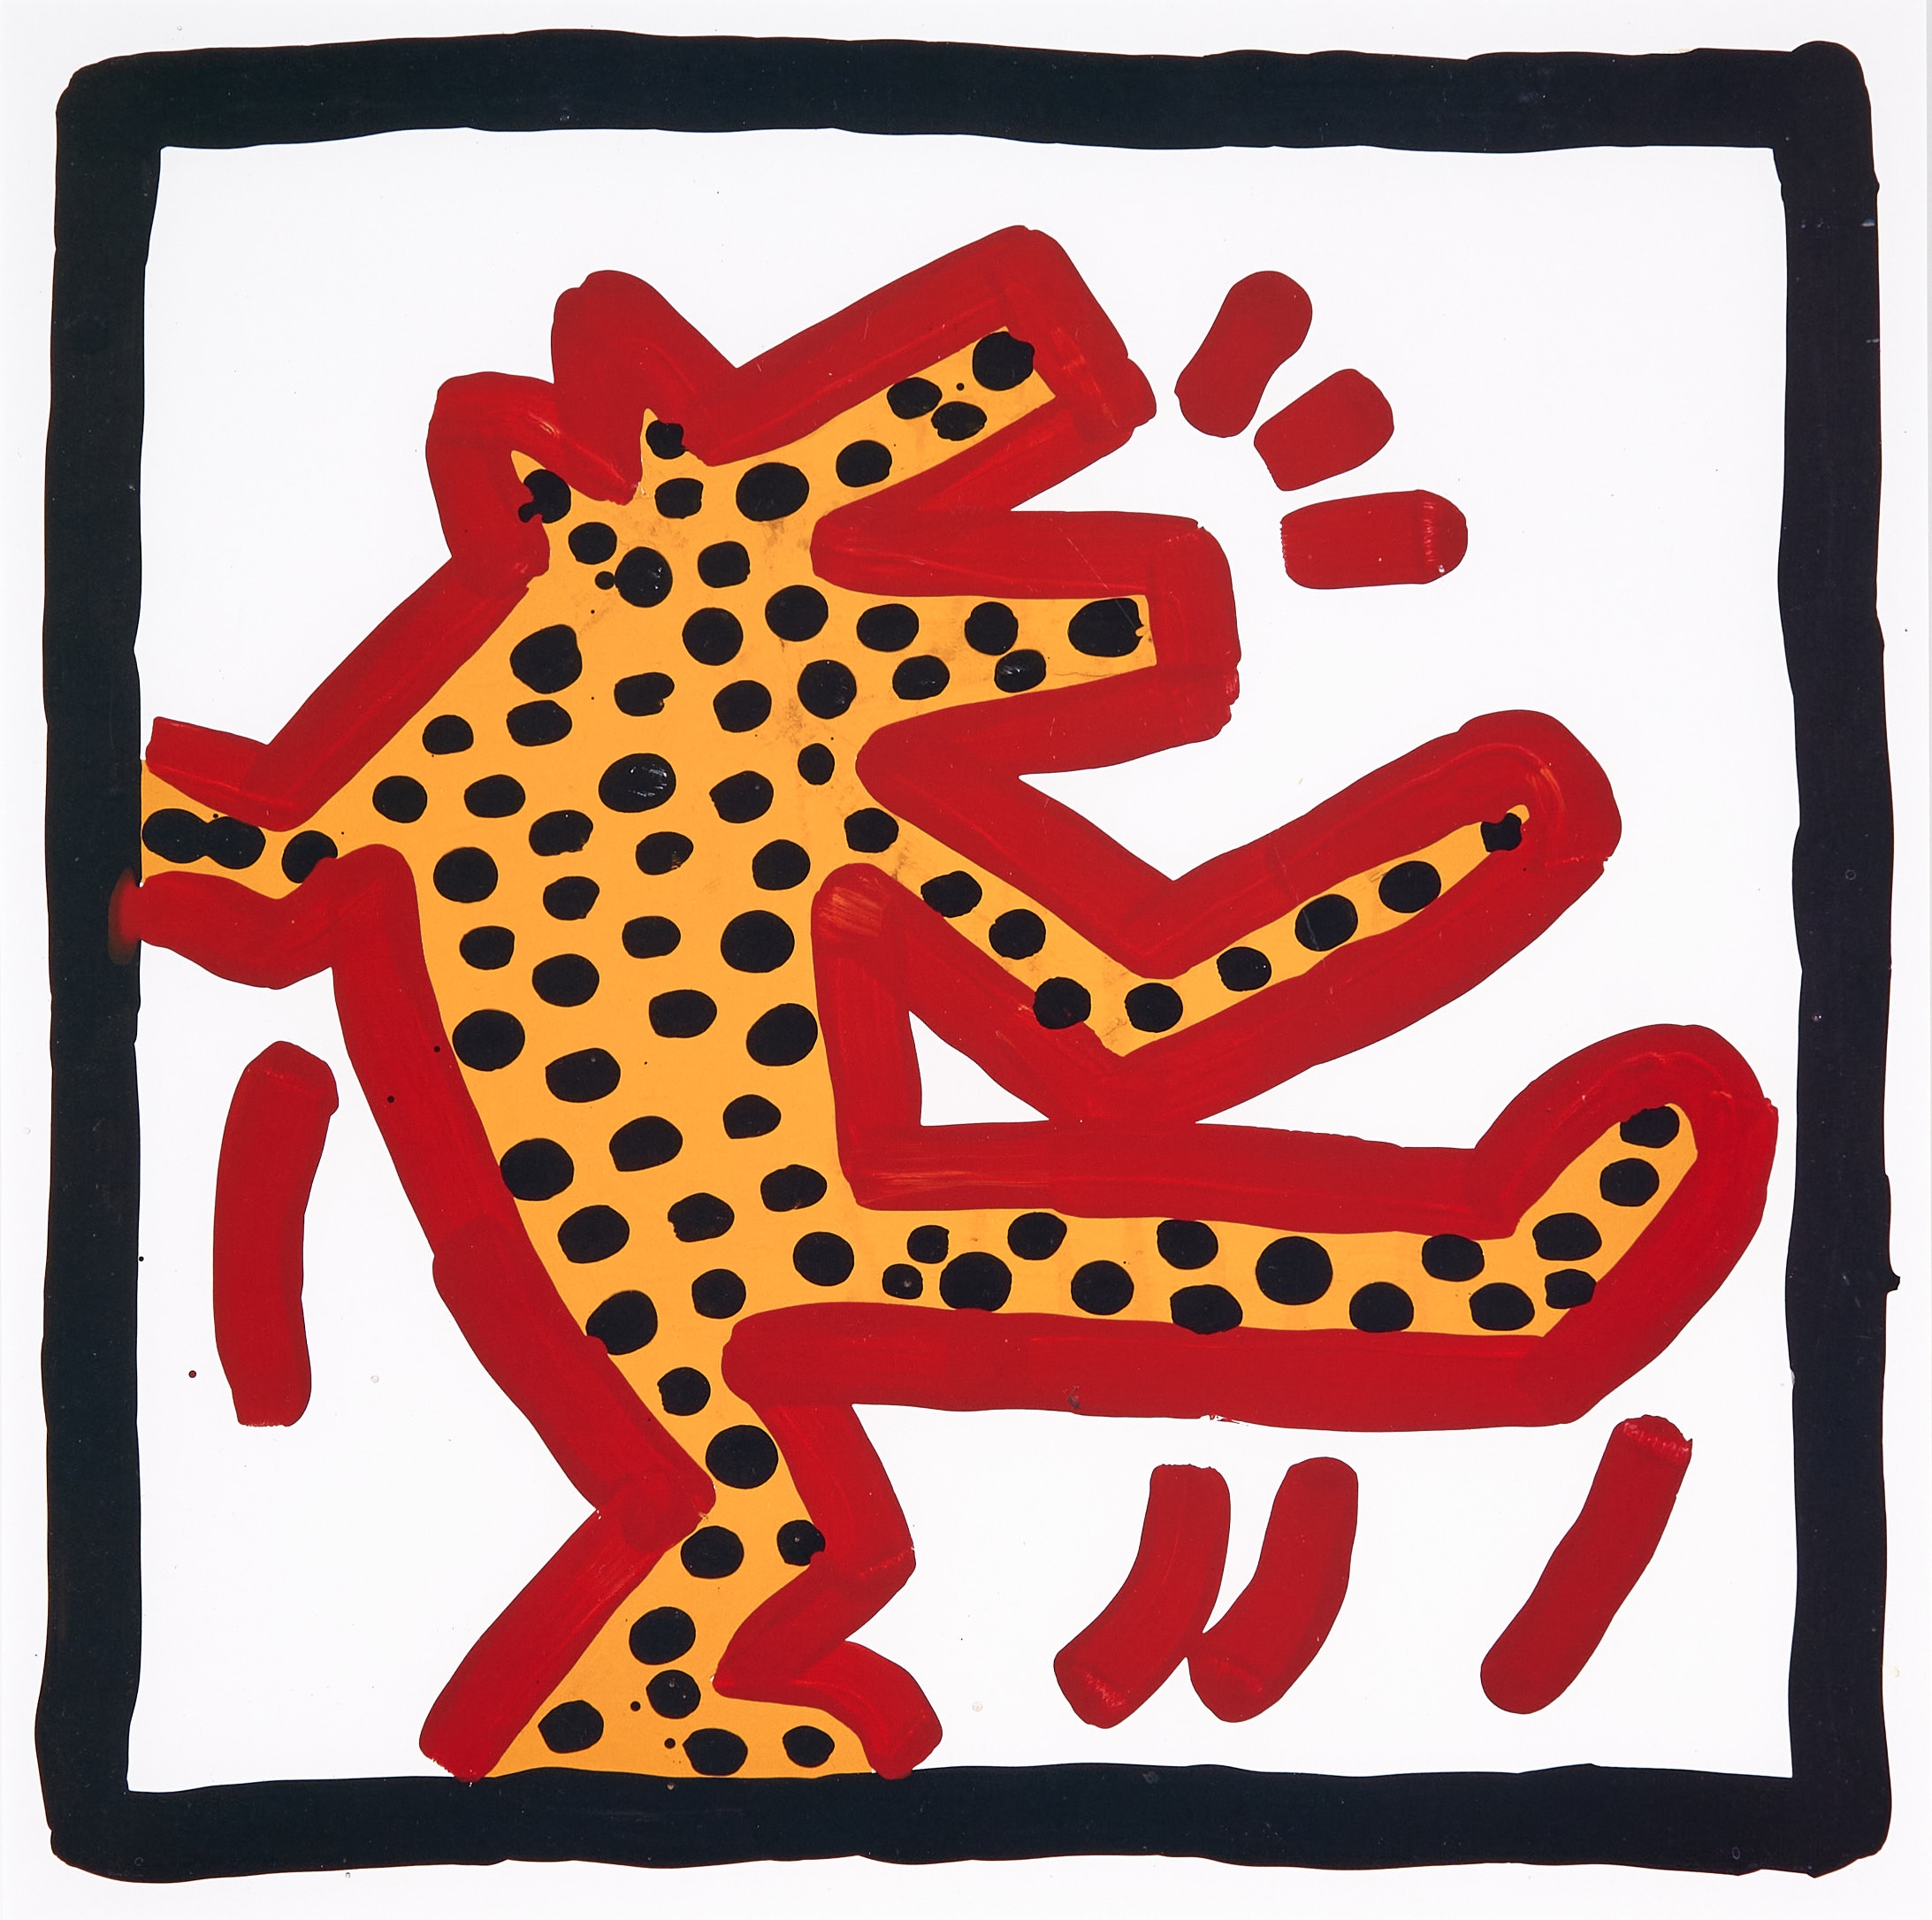 Untitled (Dog) by Keith Haring